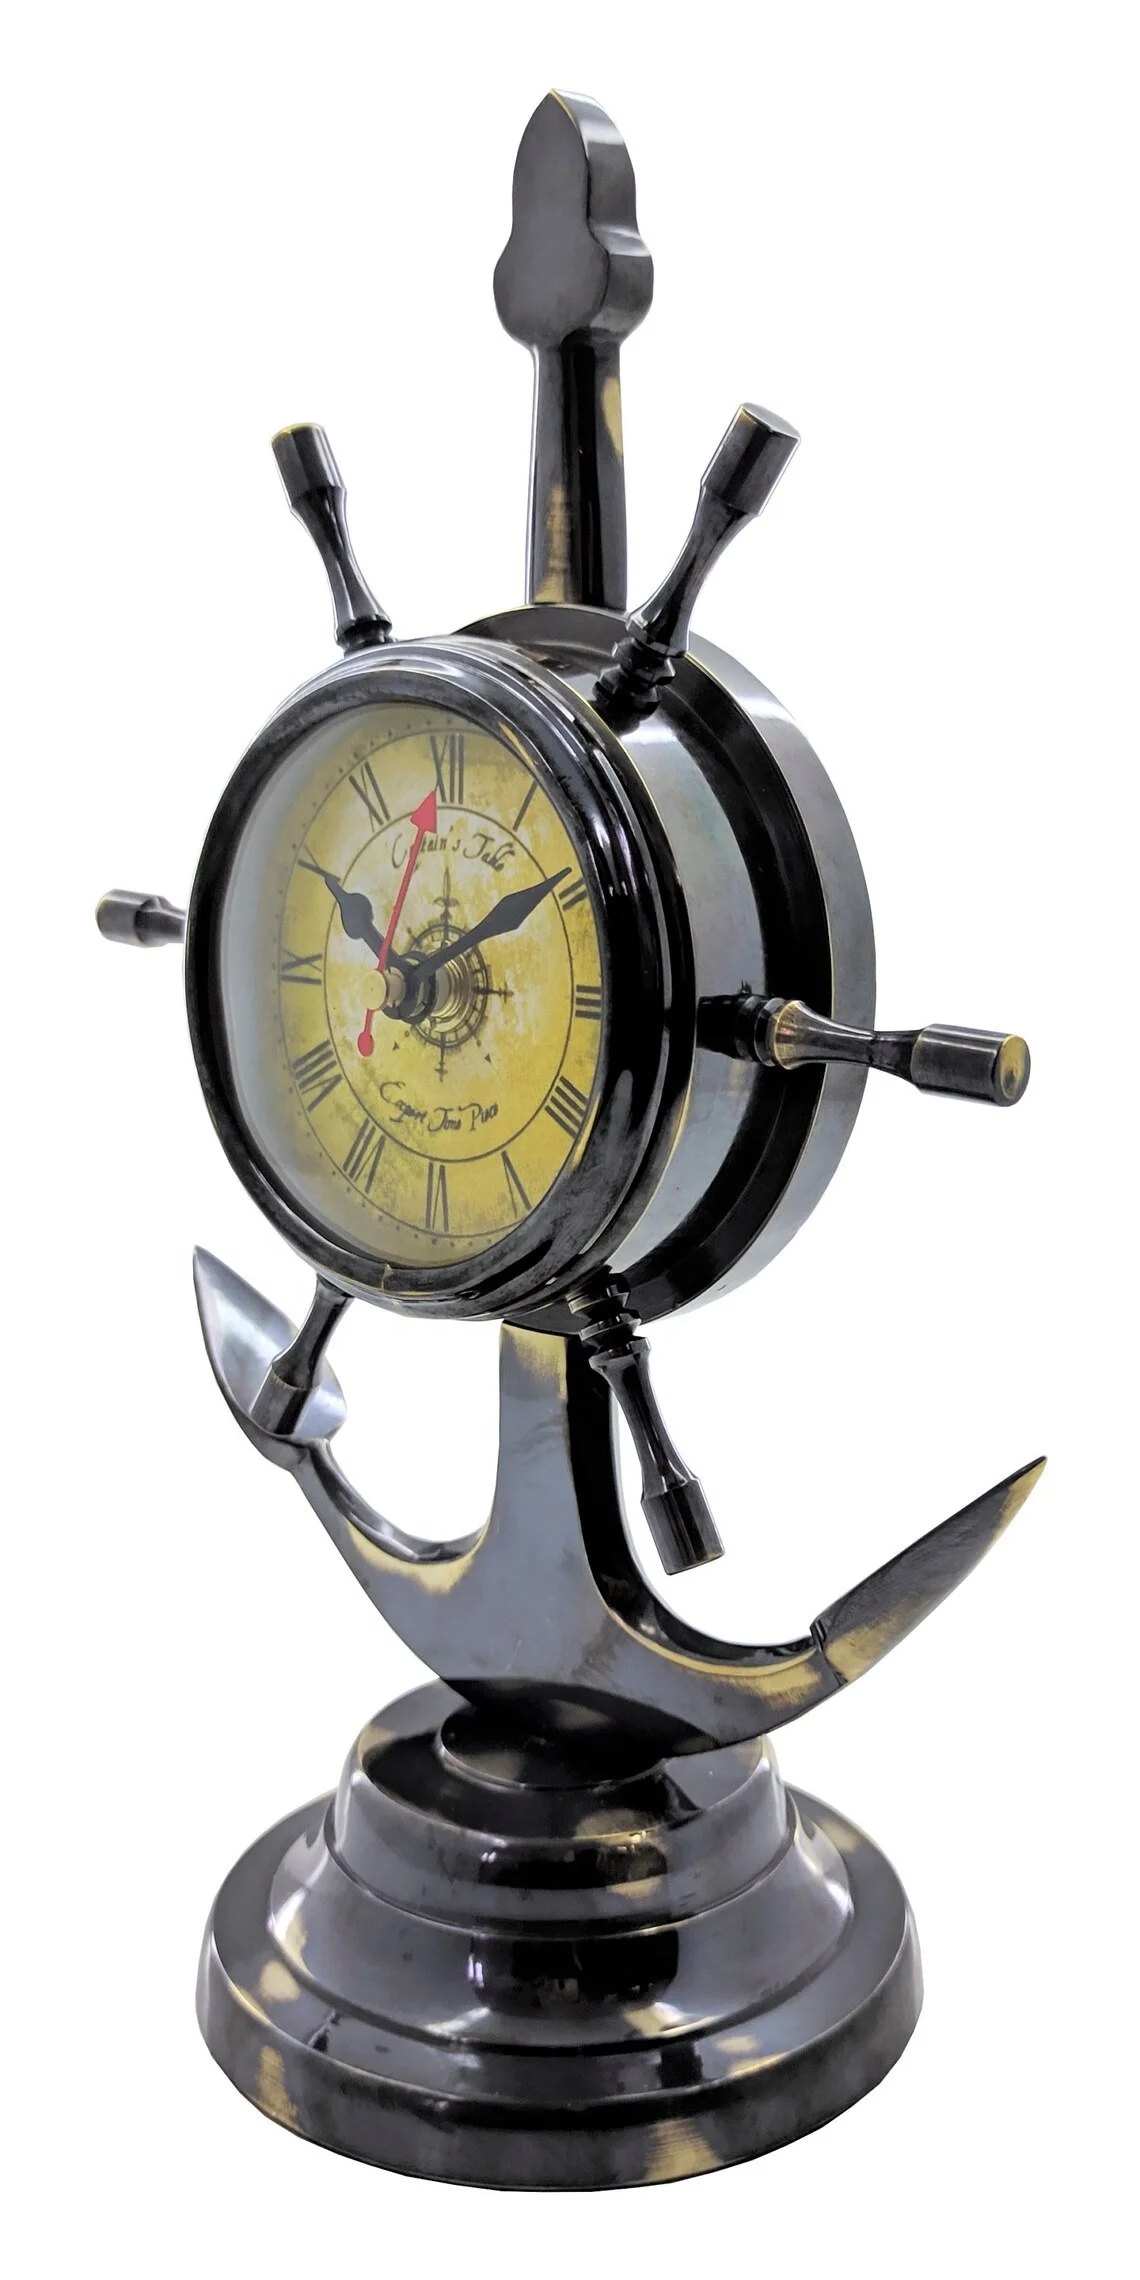 Details about   Maritime Nautical Antique Brass Table Clock Decorative Collectible Gift Item 